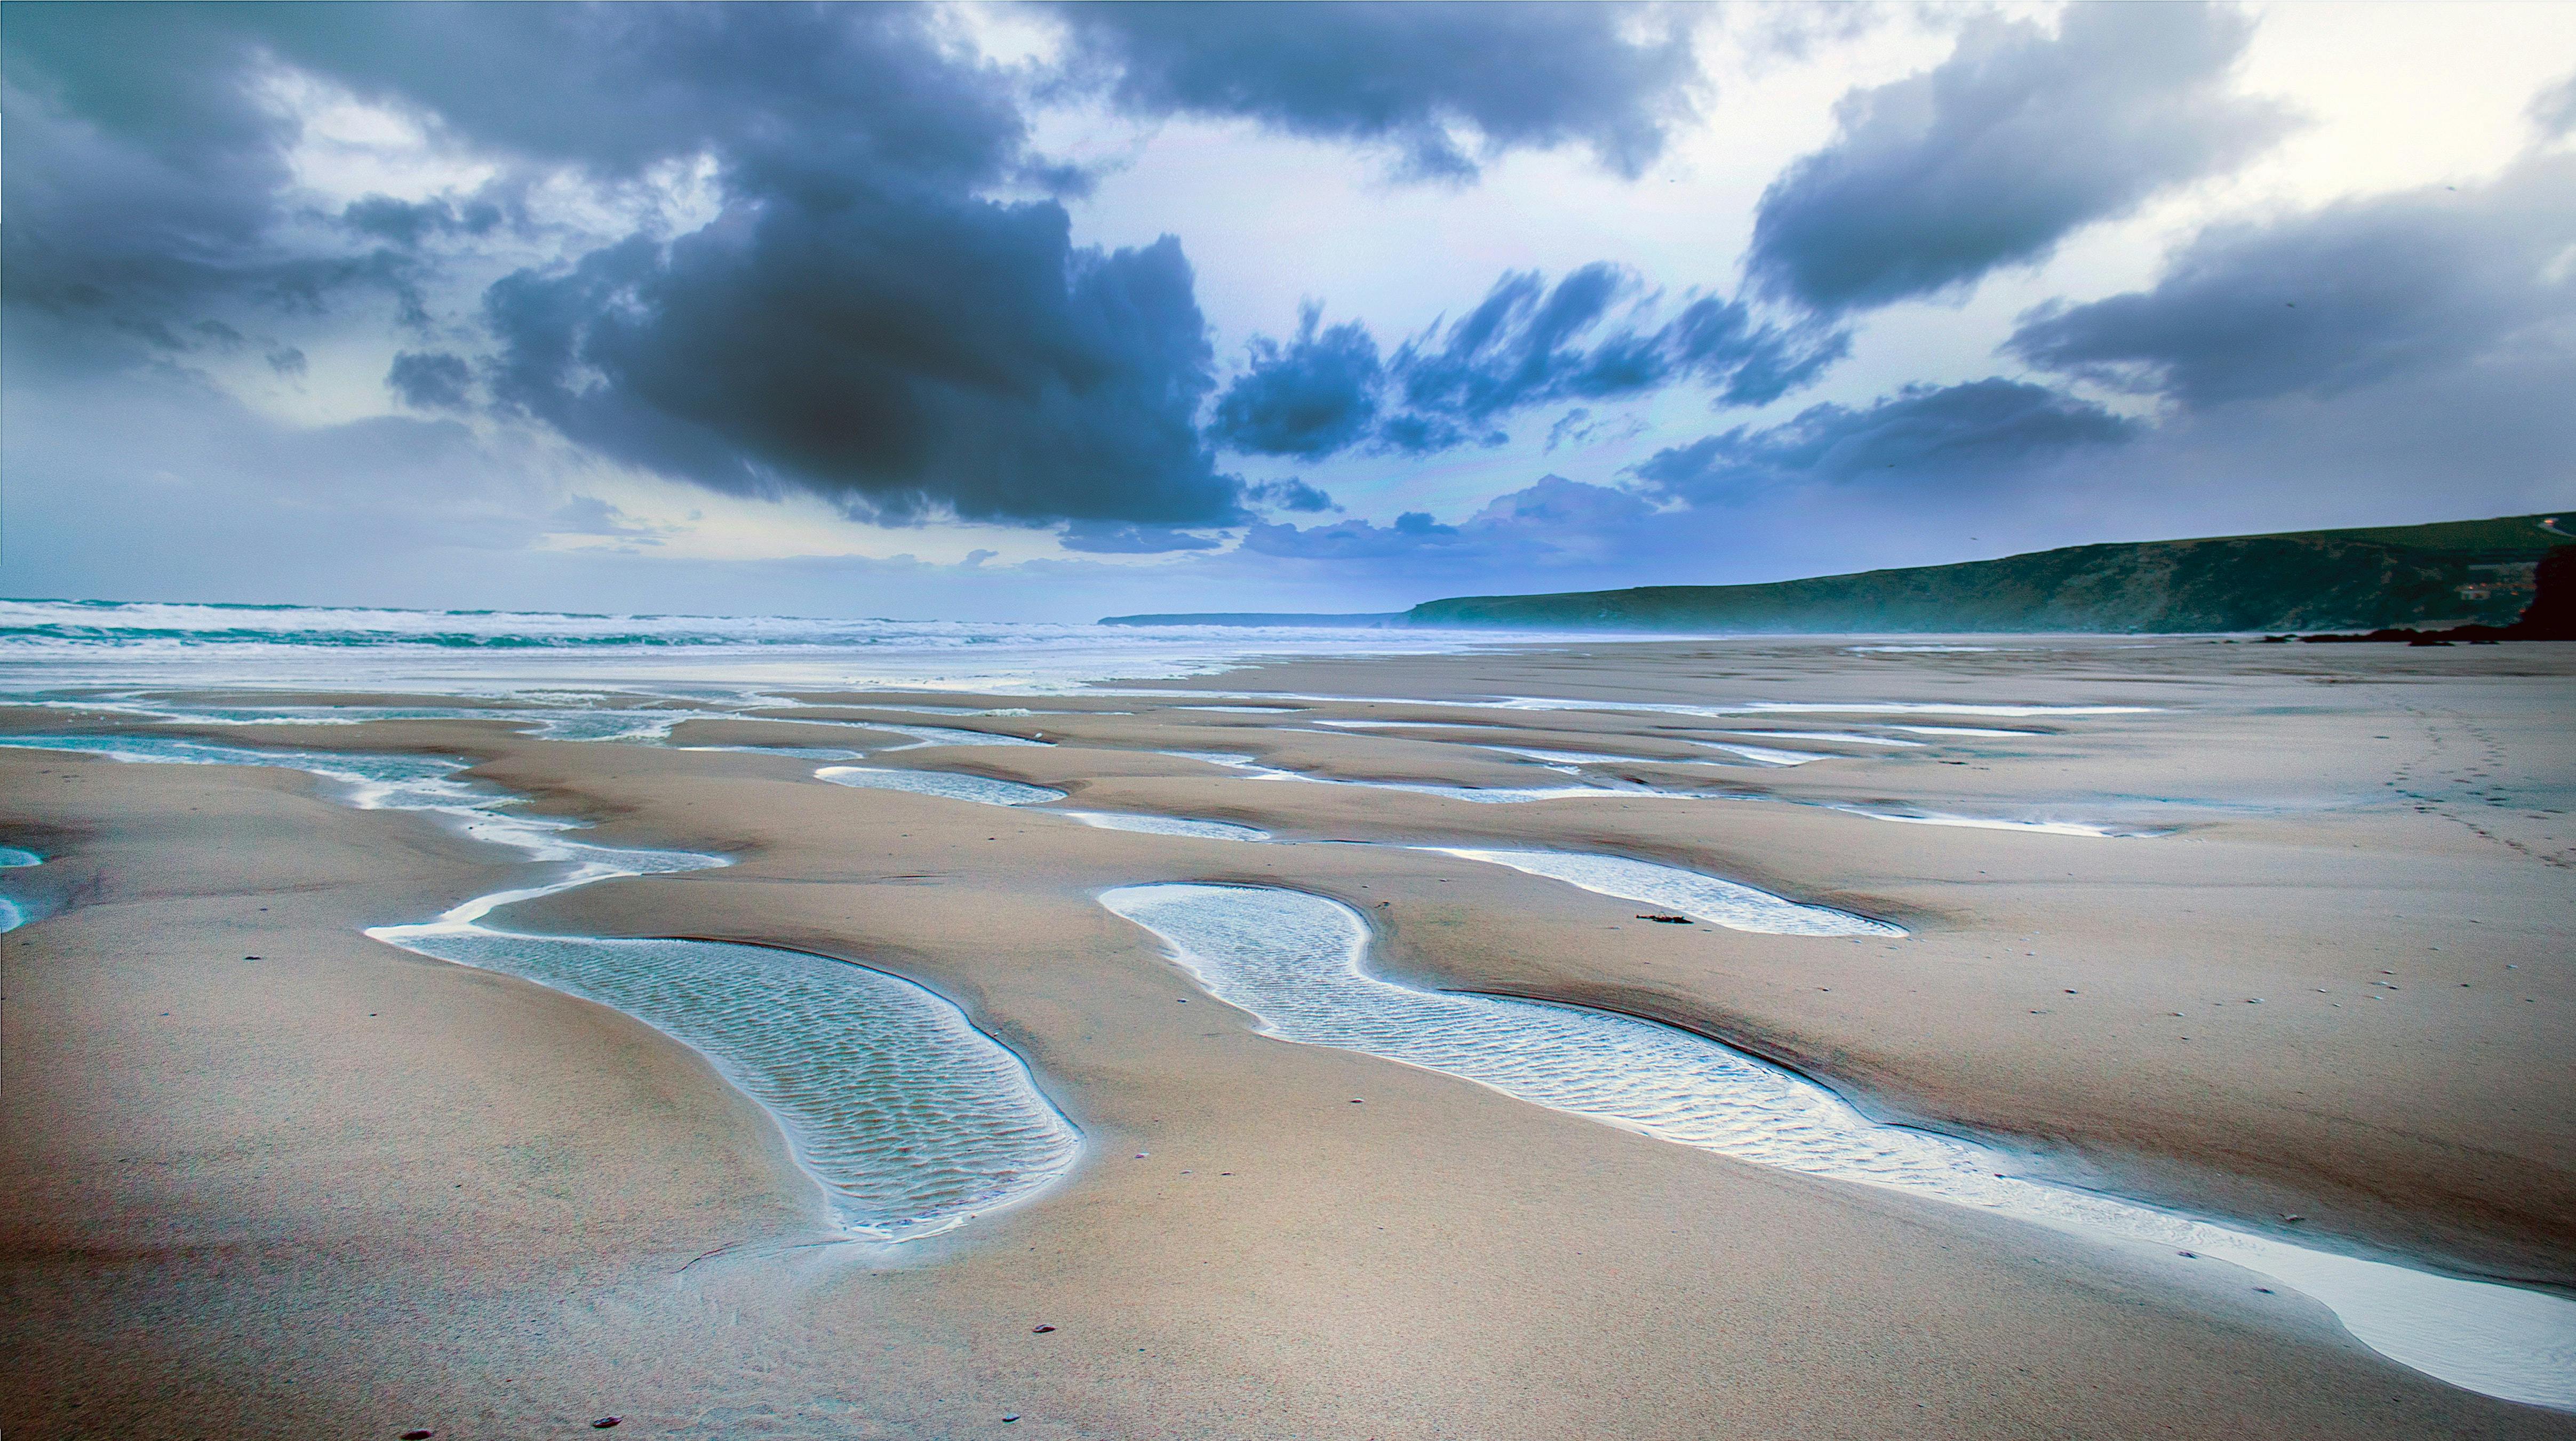 A beach at low tide with dark clouds overhead